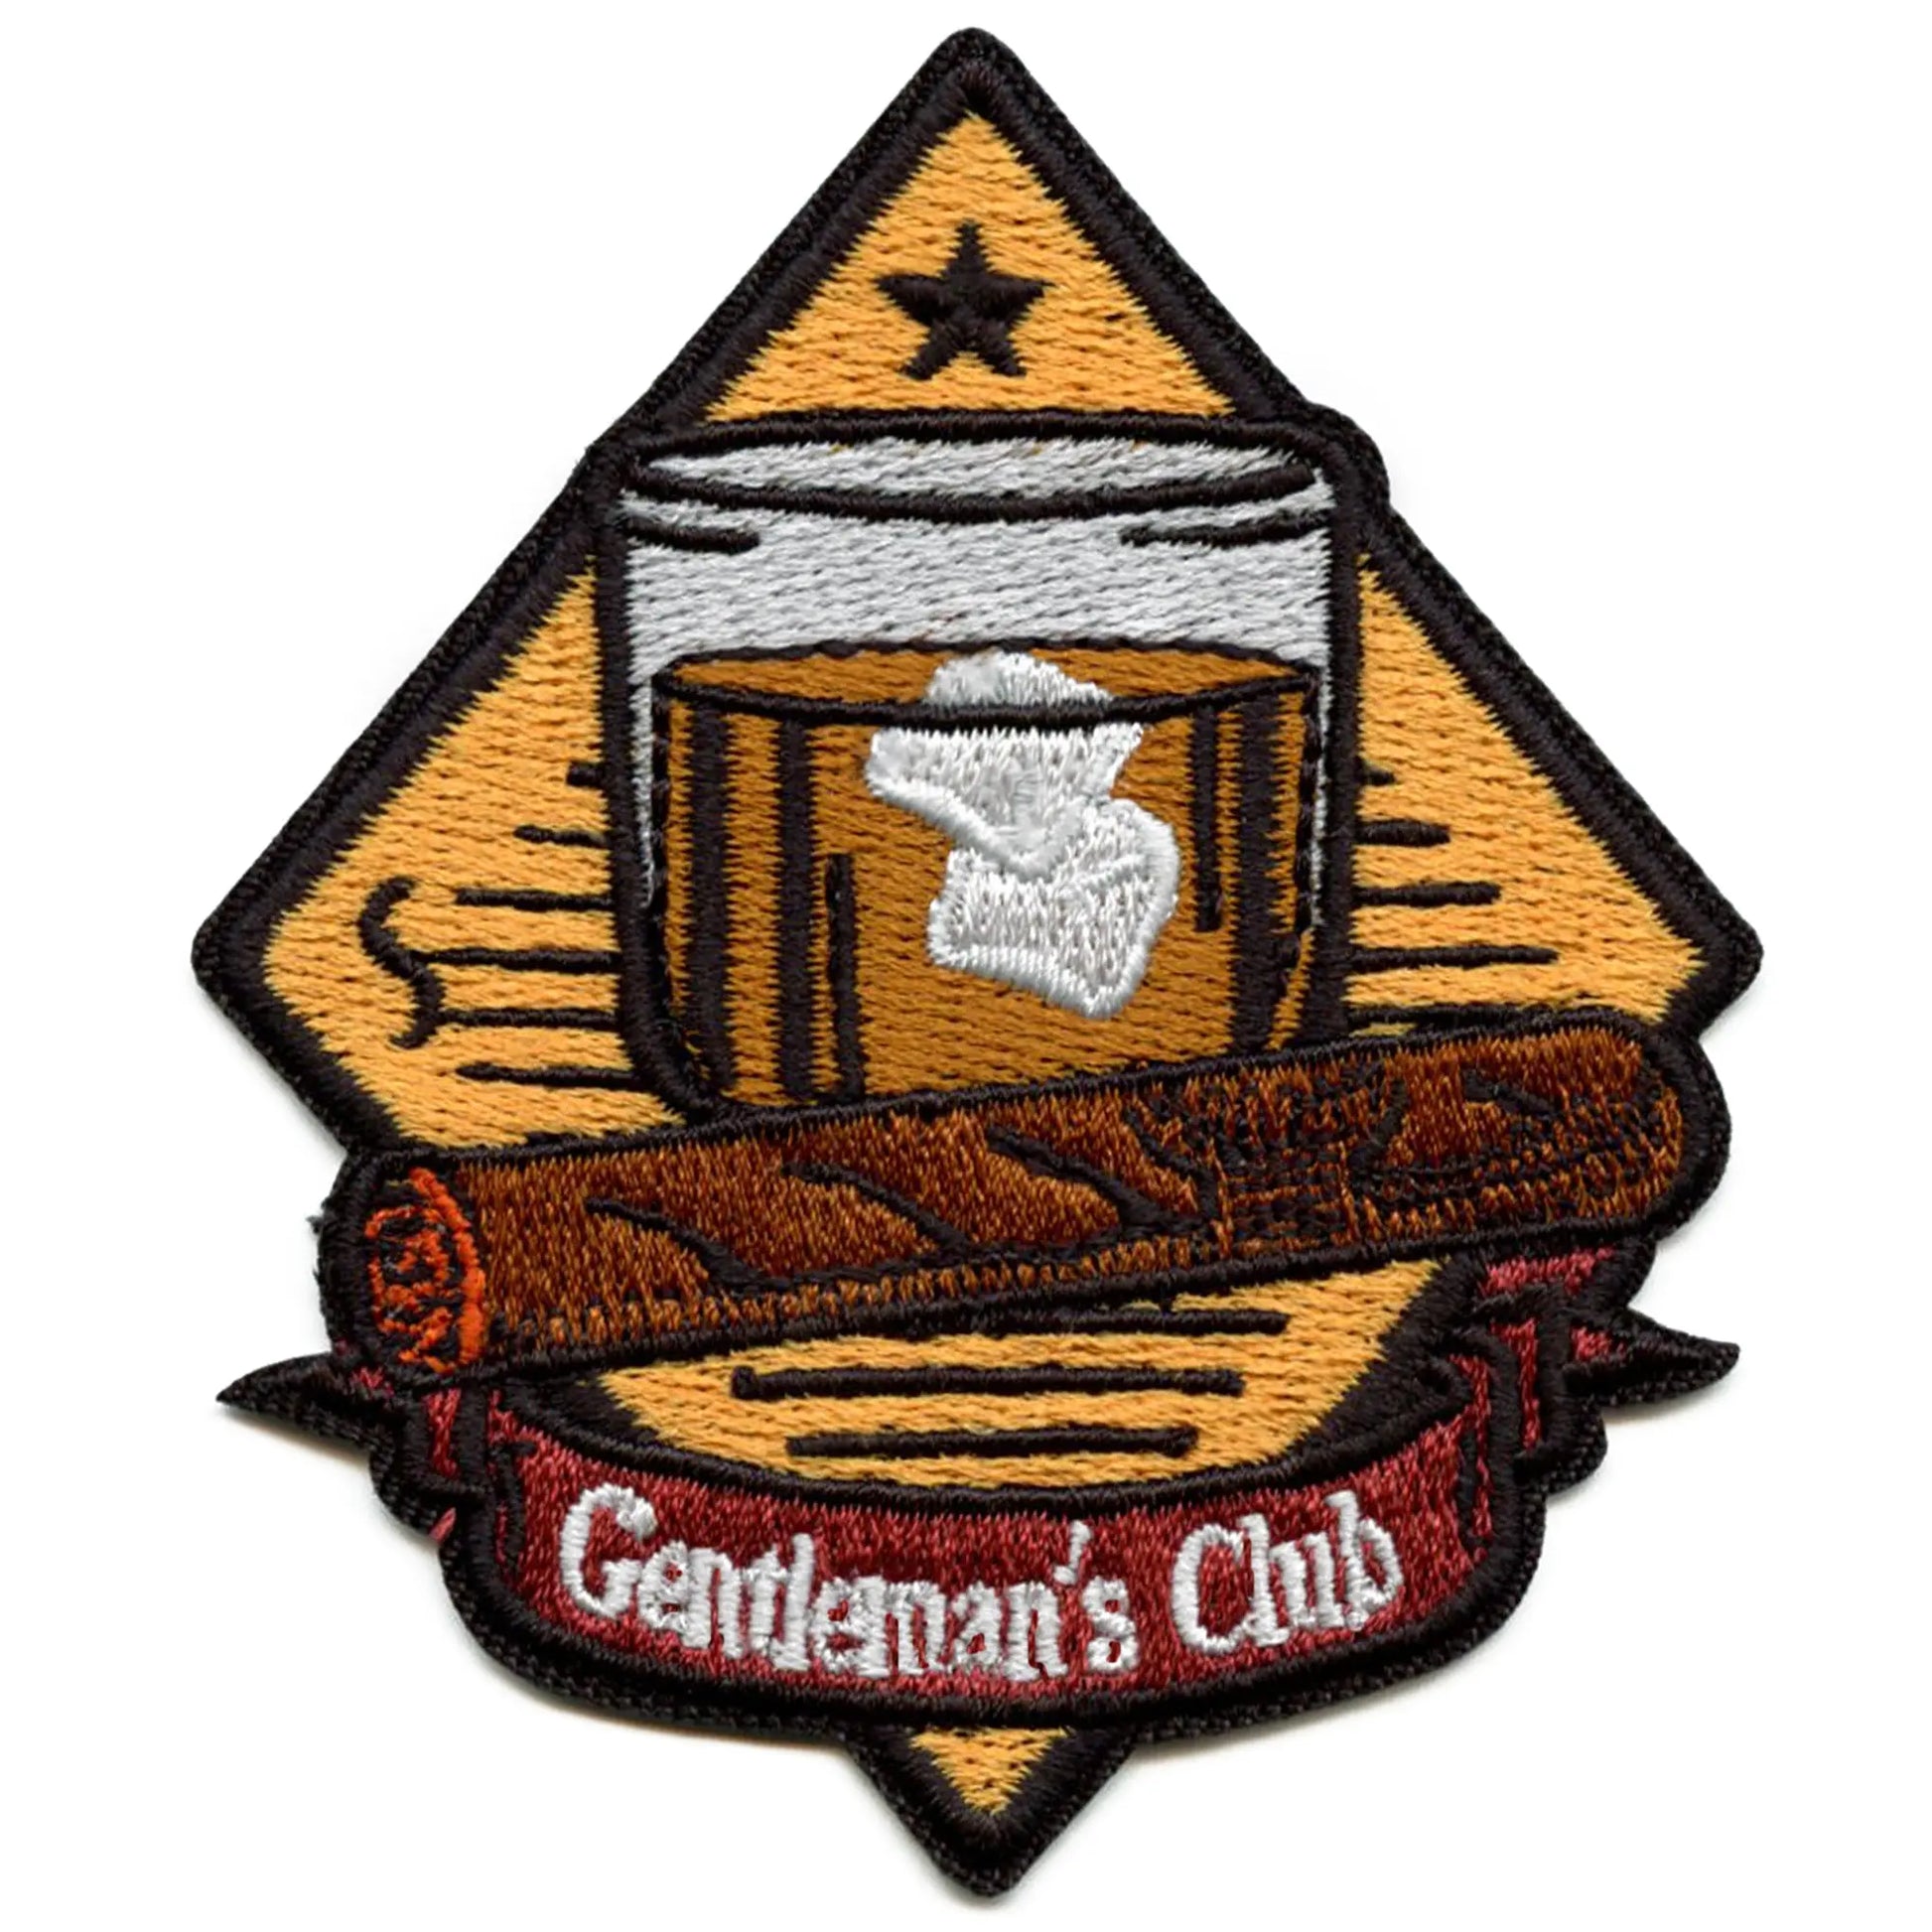 Cigar And Whiskey Gentleman's Club Patch Dinks Smoke Embroidered Iron